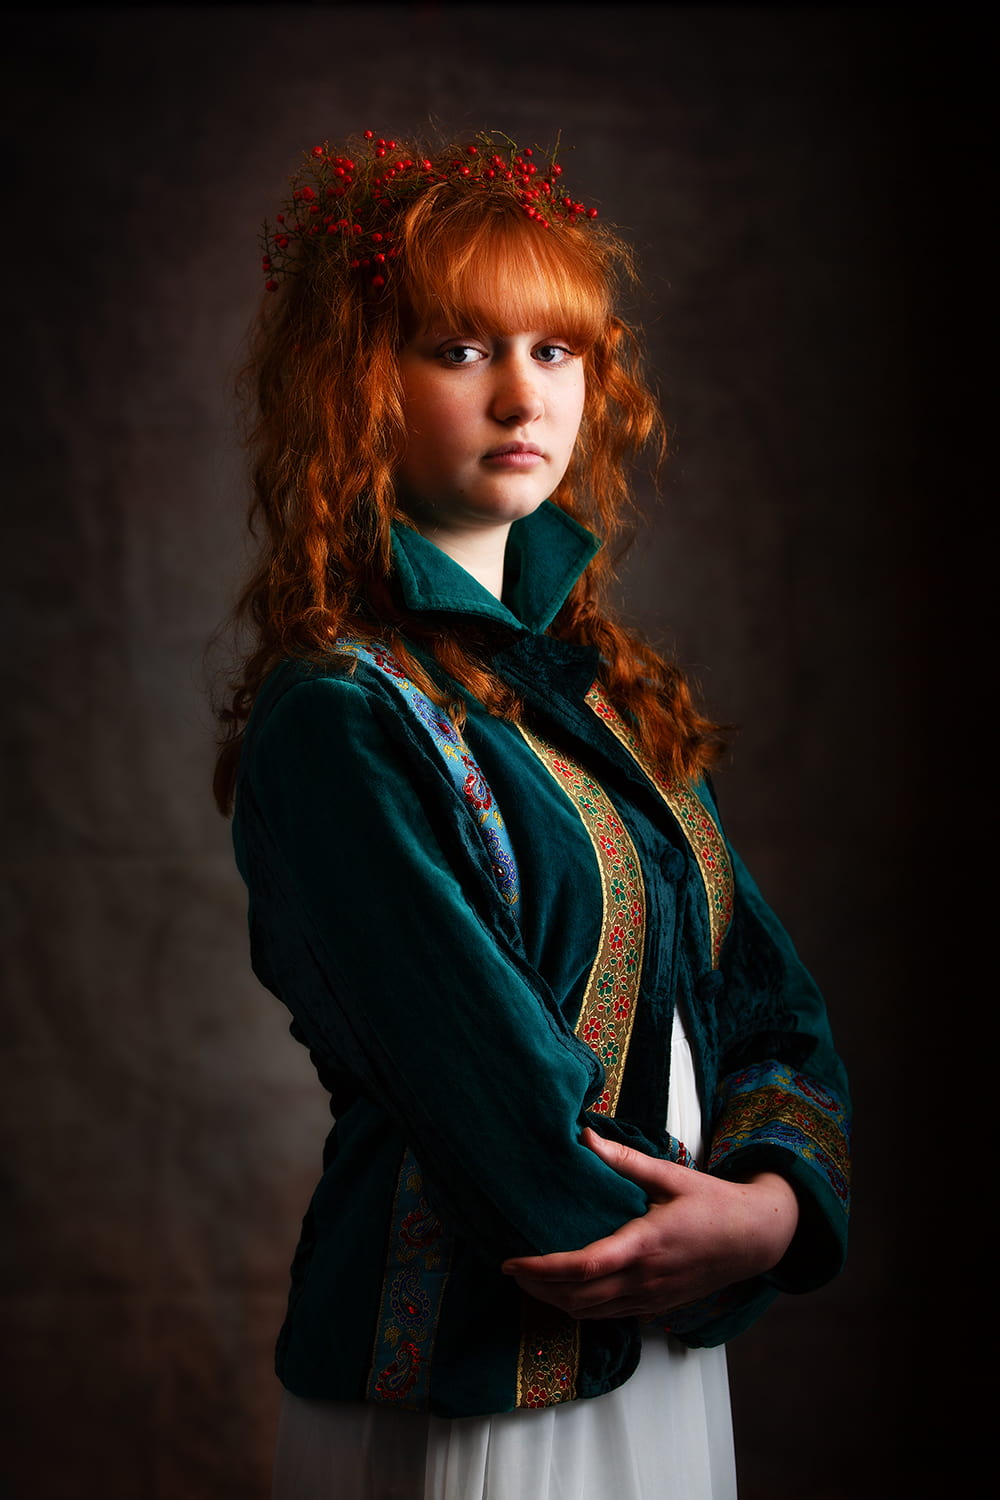 Portrait of a teenage girl with red hair wearing a green jacket with red berries in her hair.